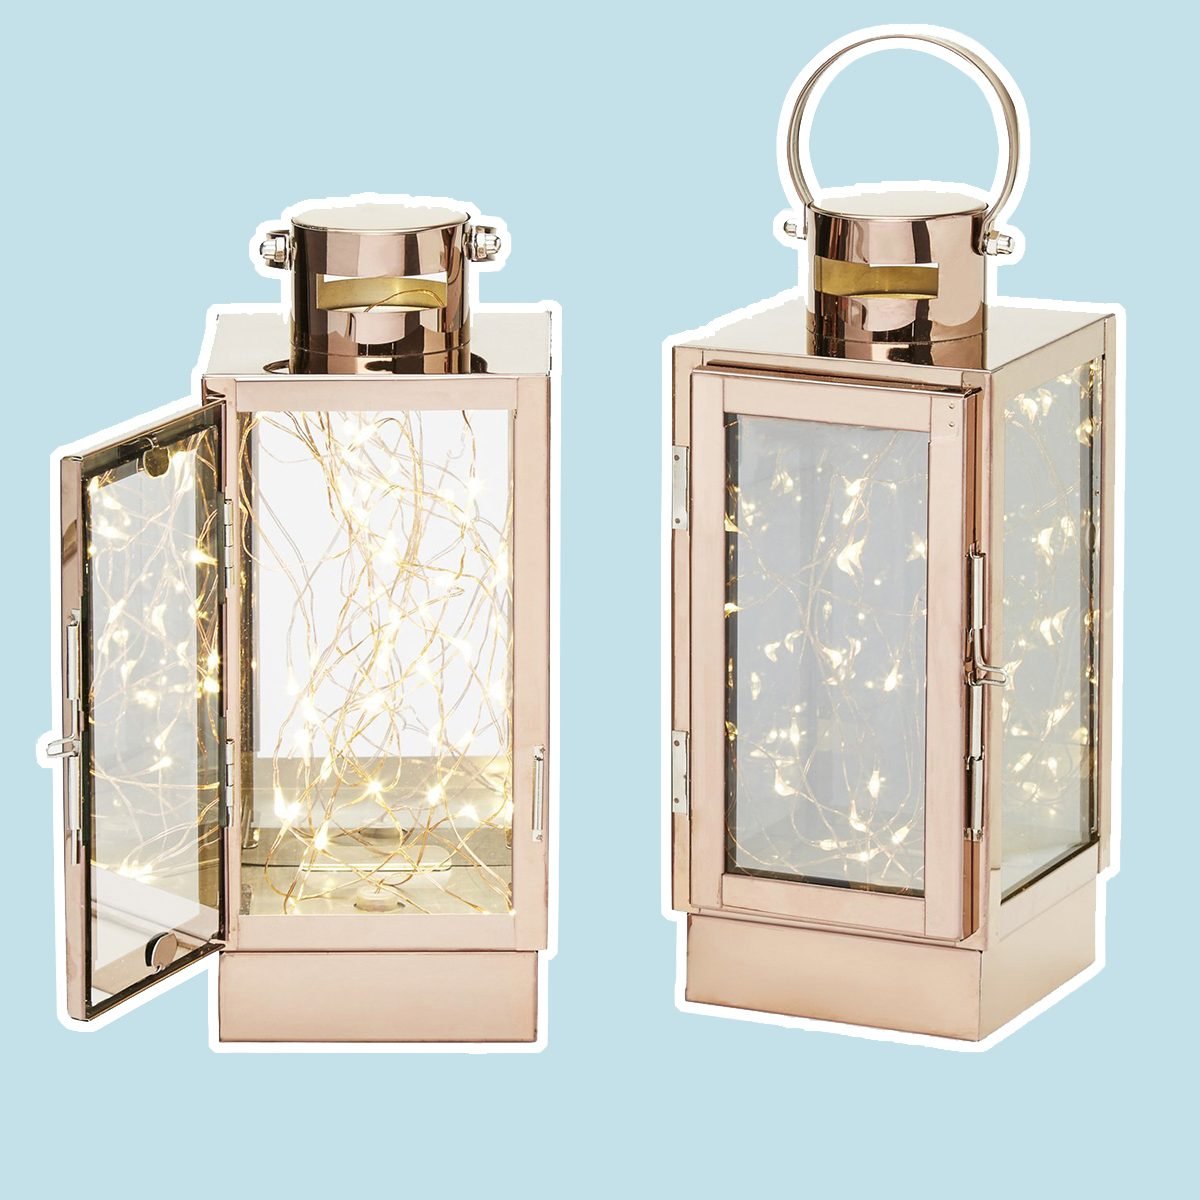 Rose Gold Flameless Lanterns, 30 Fairy LEDs, Copper Wire, Timer Option and Batteries Included - Set of 2